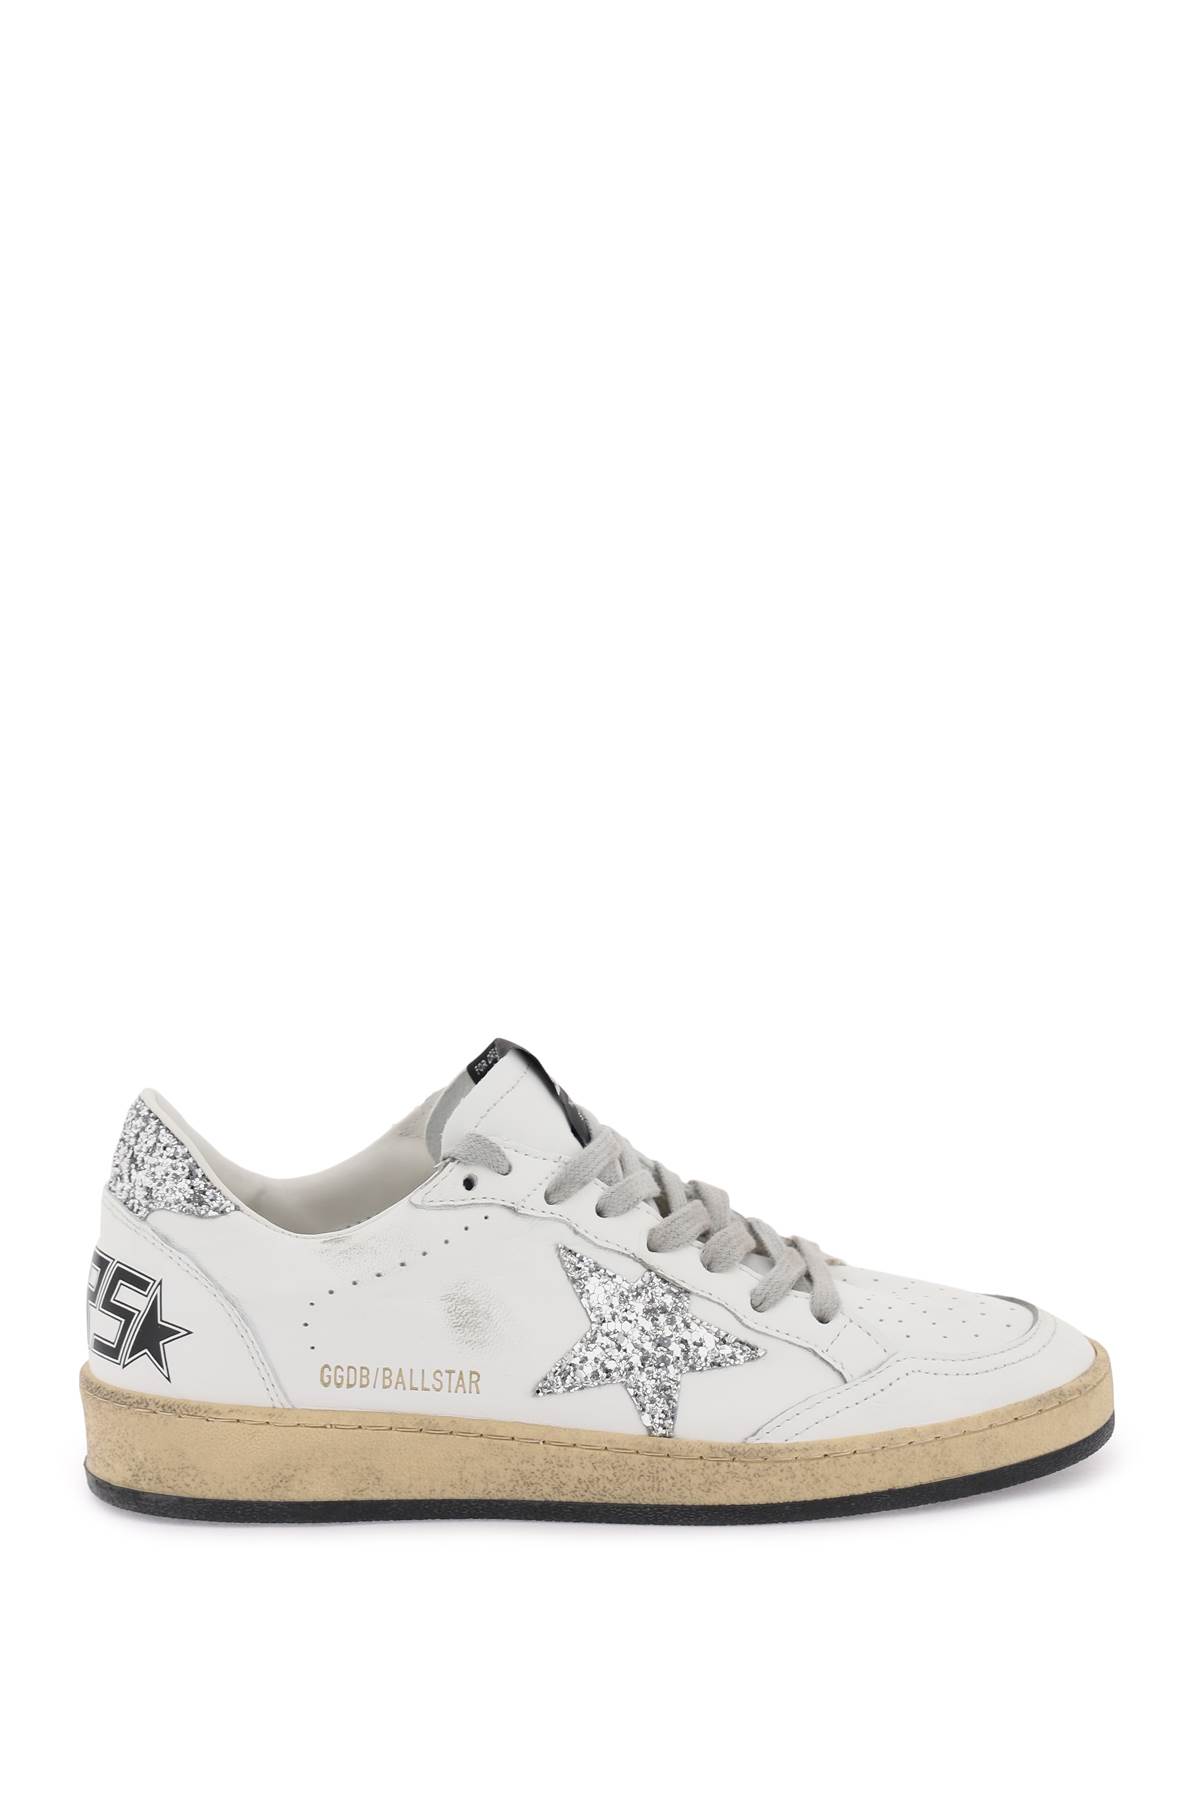 GOLDEN GOOSE LEATHER BALL STAR SNEAKERS